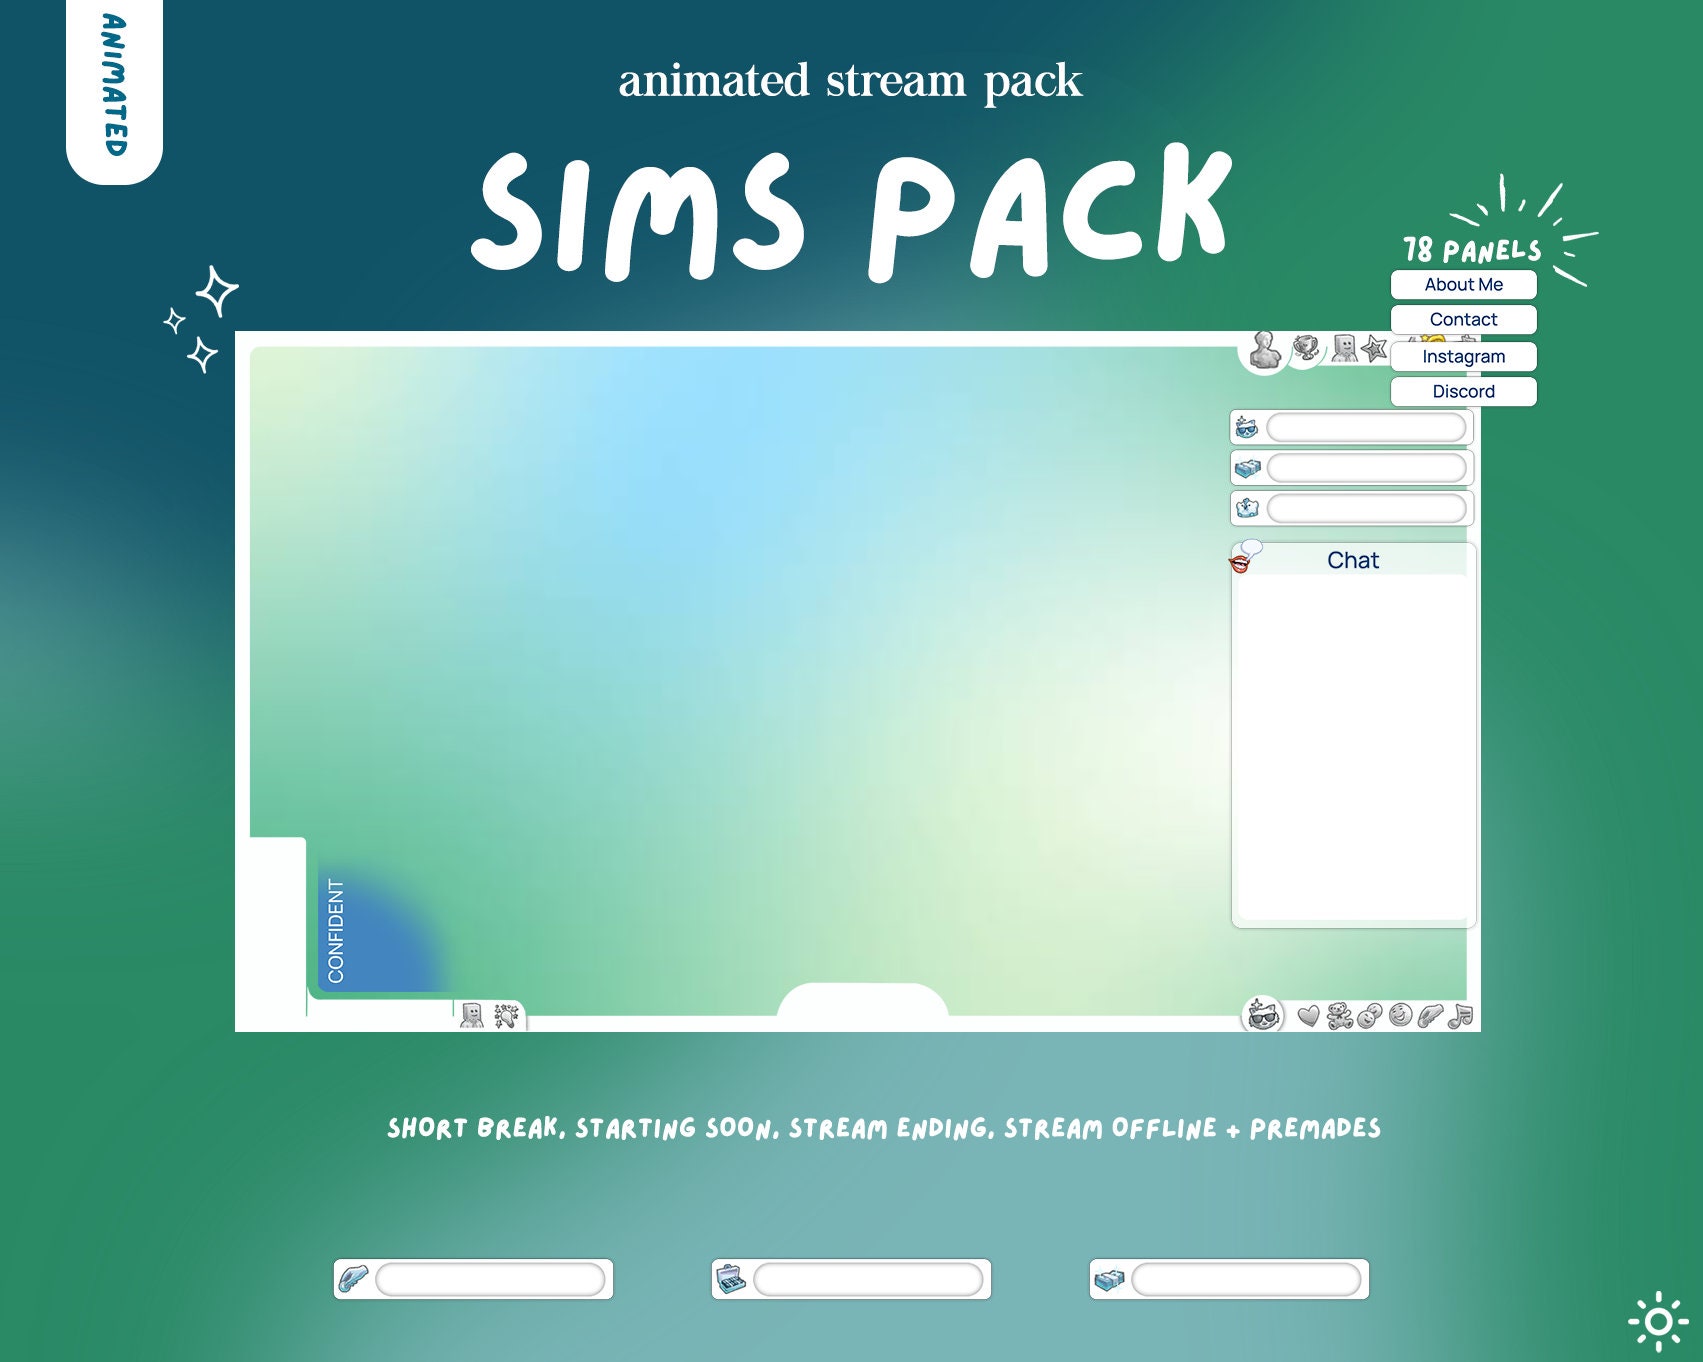 Mod The Sims - HelloSims' The Sims 3 Instant Skill Challenges